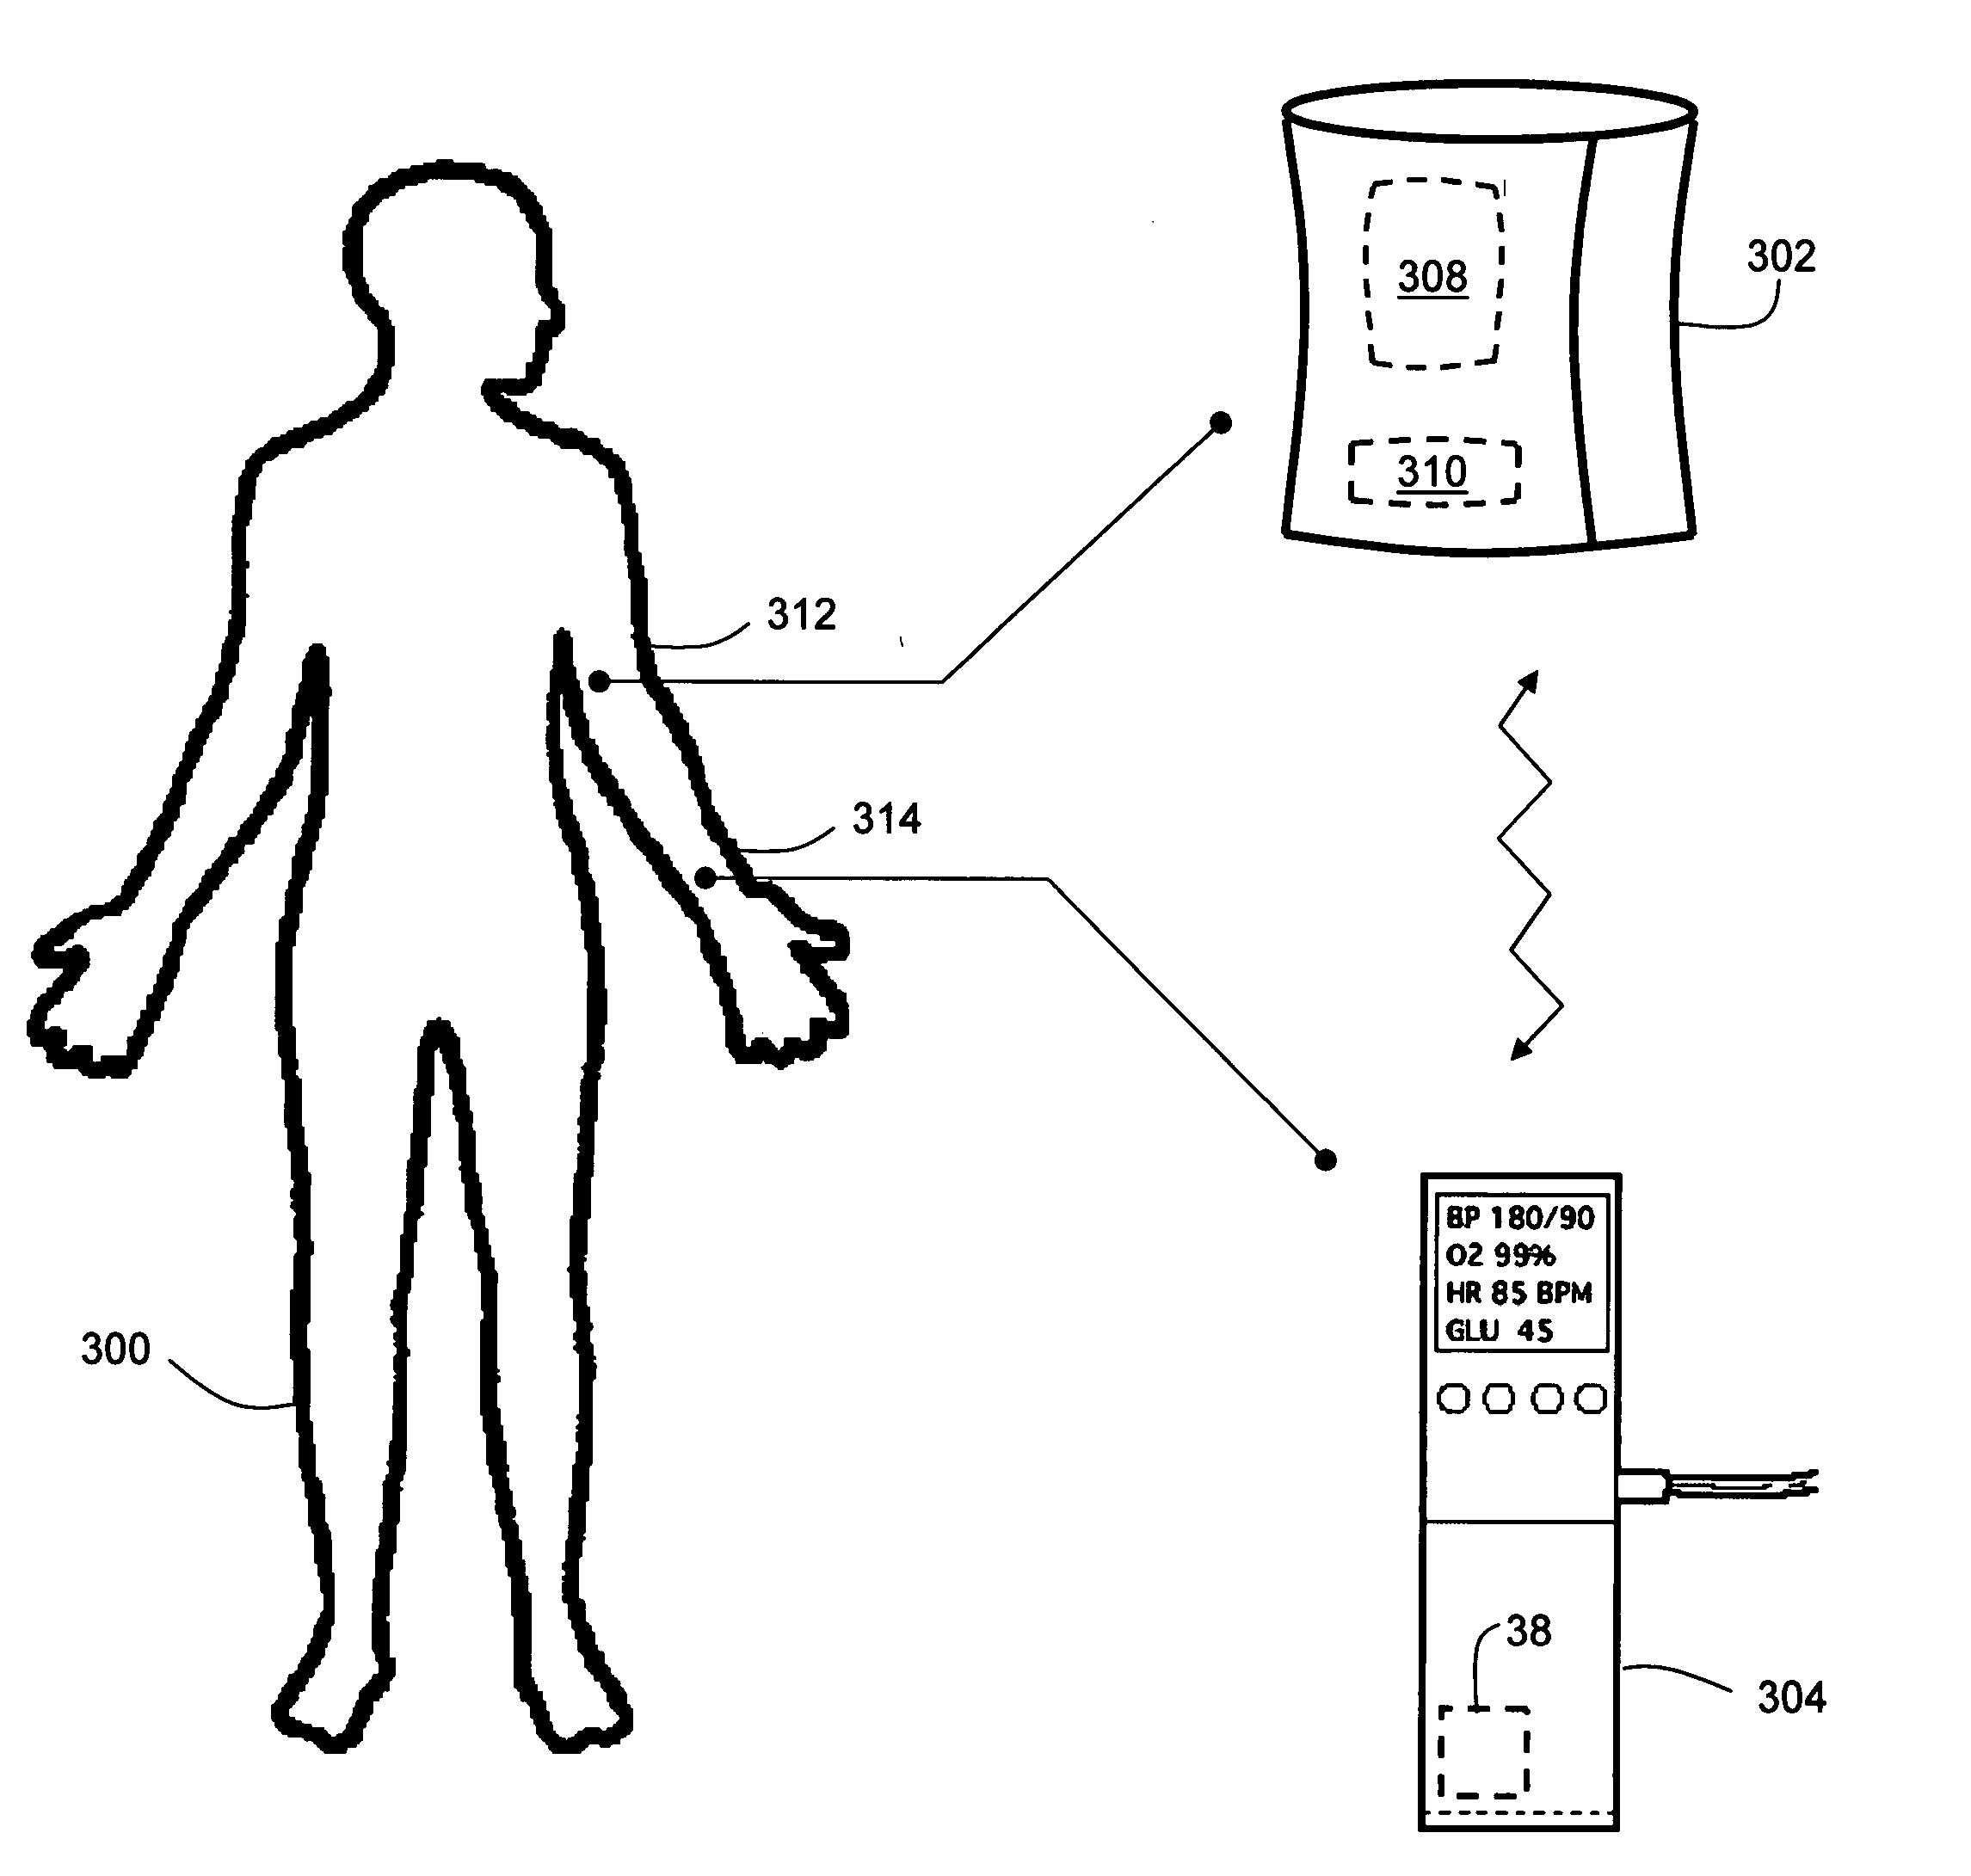 Blood-pressure monitoring device featuring a calibration-based analysis